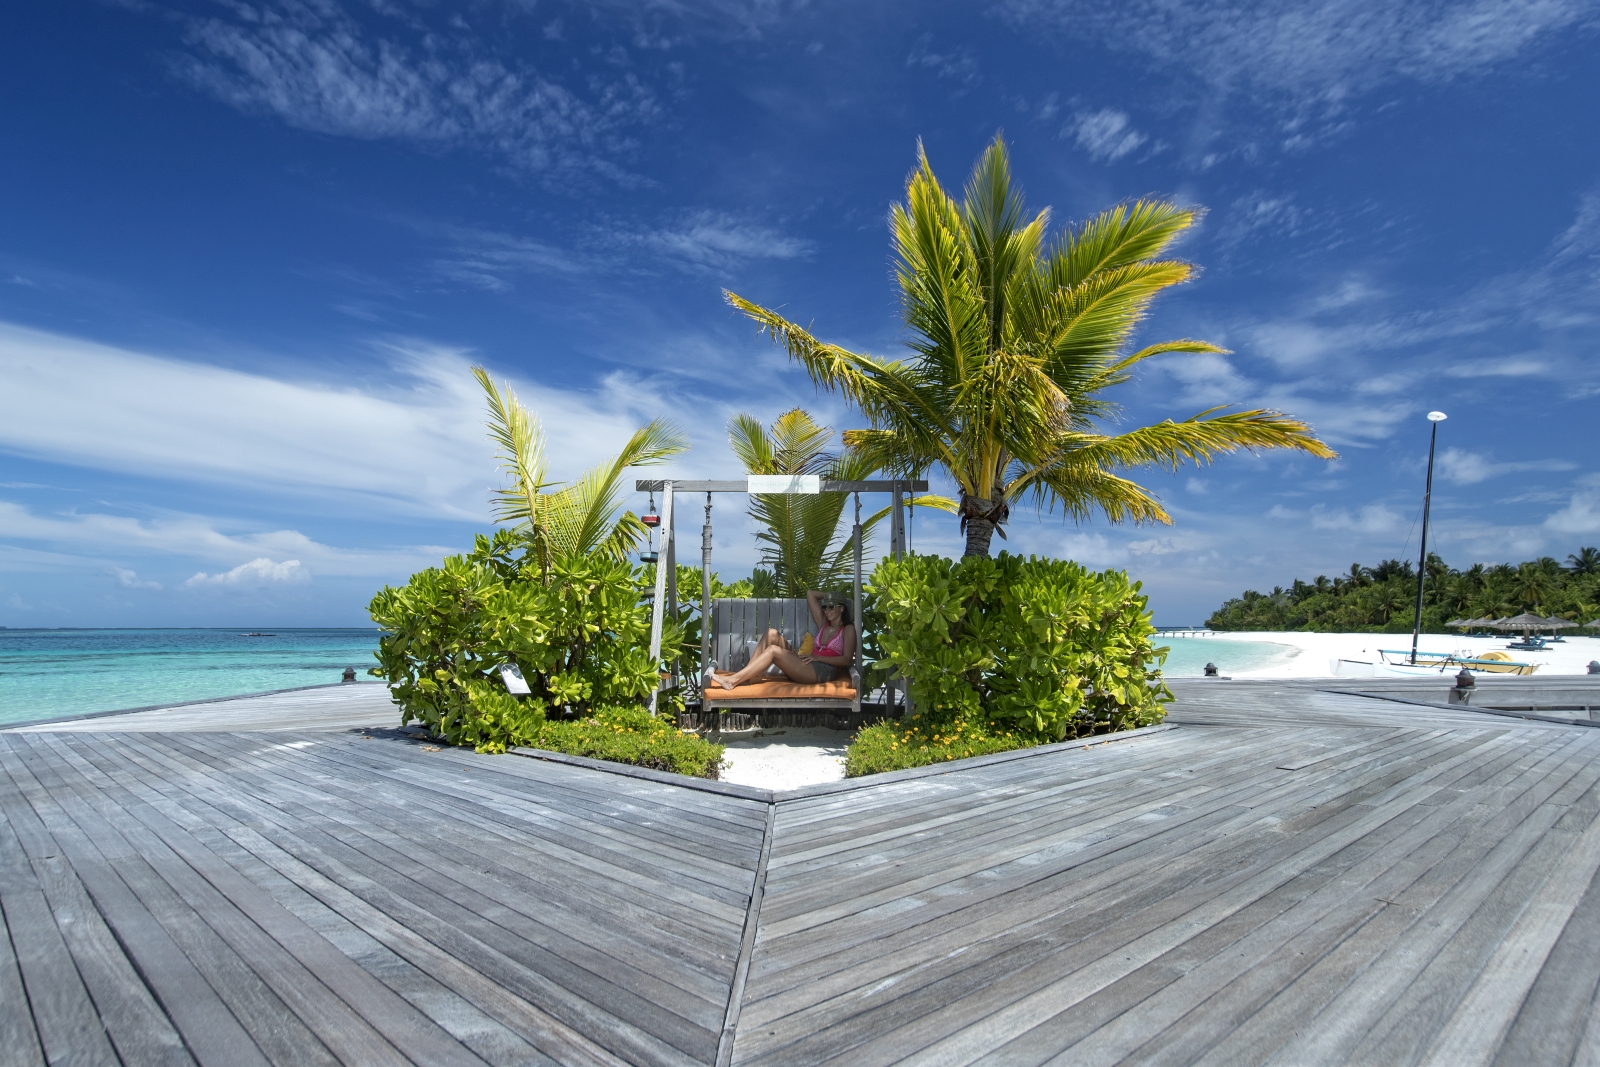 Guest sitting on a wooden swing on the beach of luxury resort Constance Moofushi in the Maldives